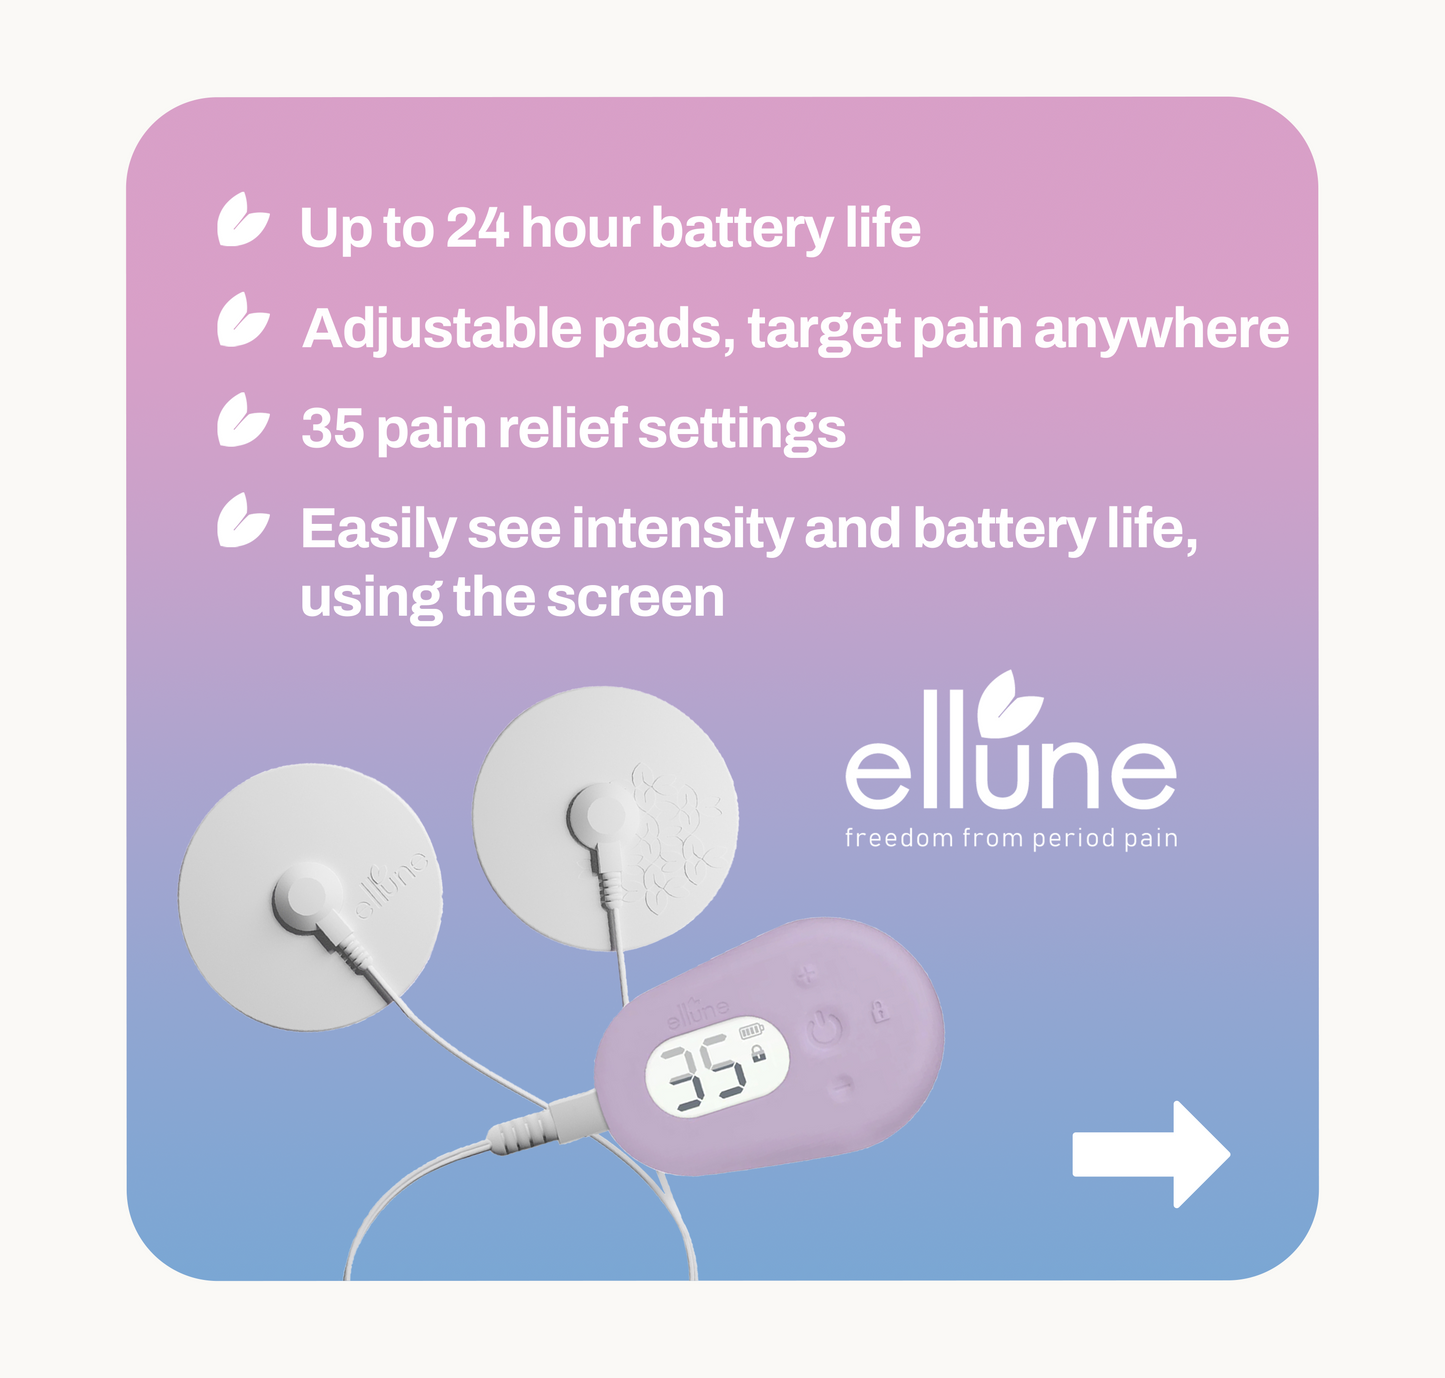 How Ellune period pain relief compares with other brands